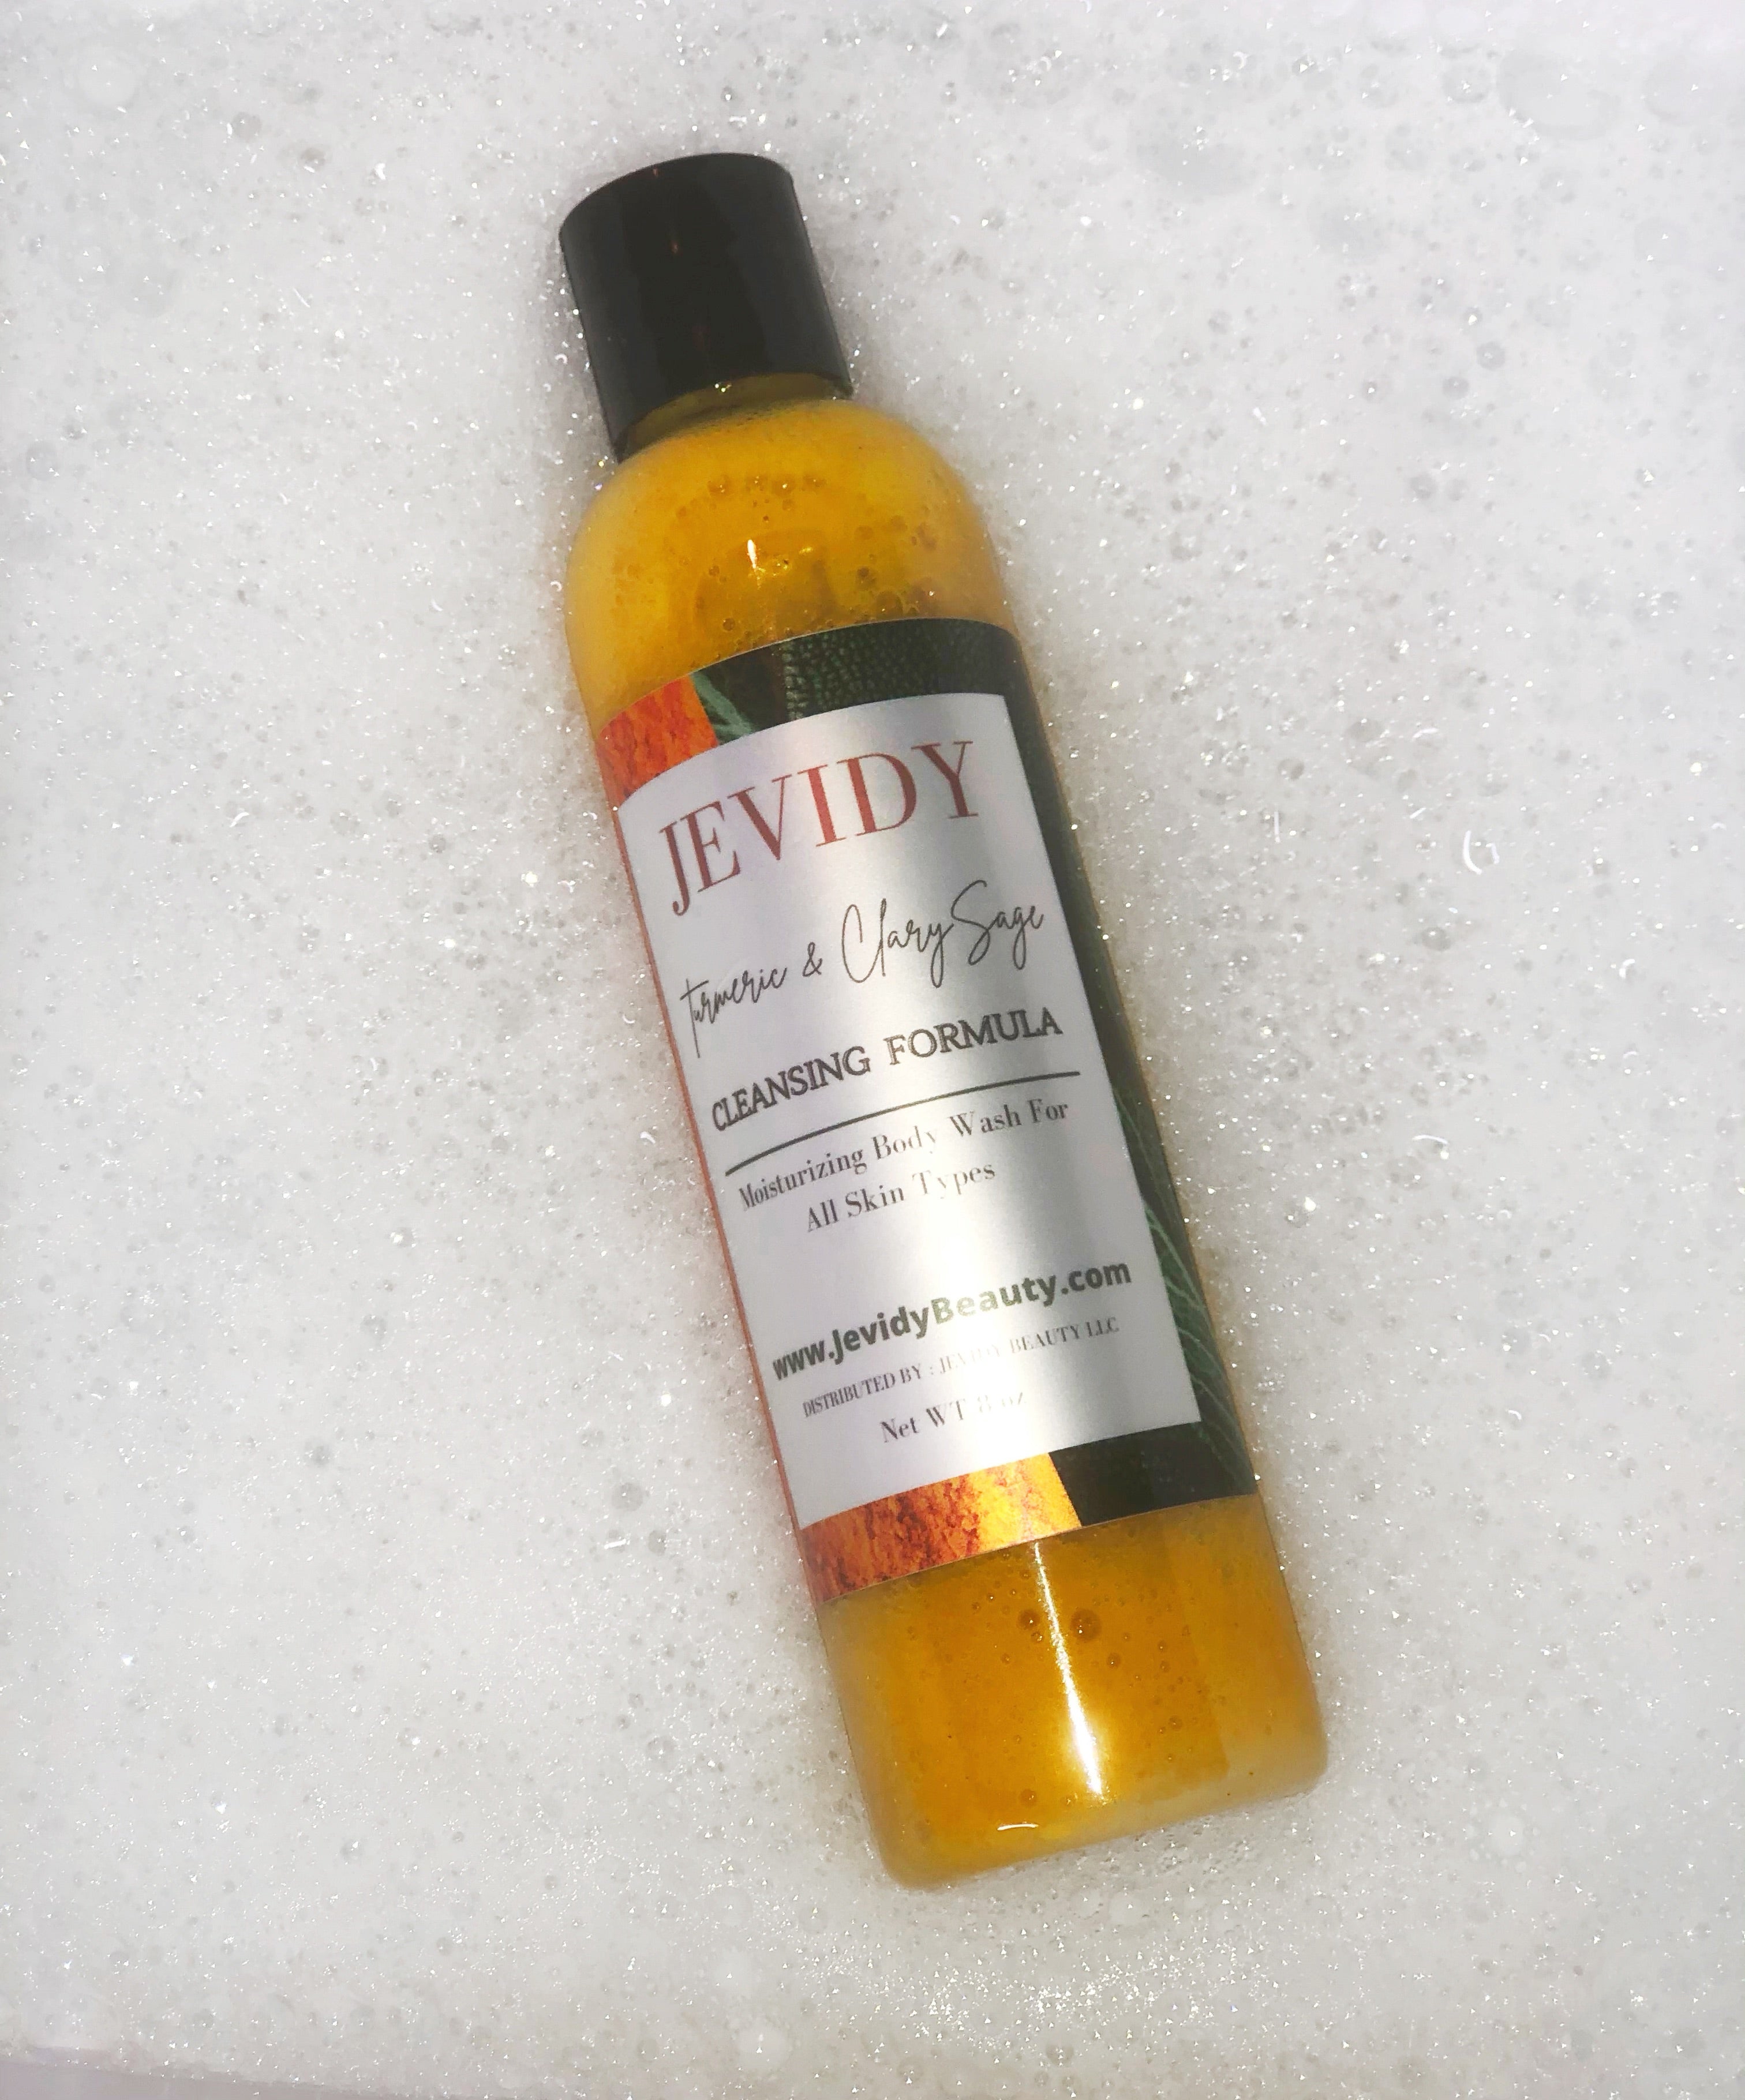 Jevidy Turmeric and Clary Sage Cleansing Body Wash